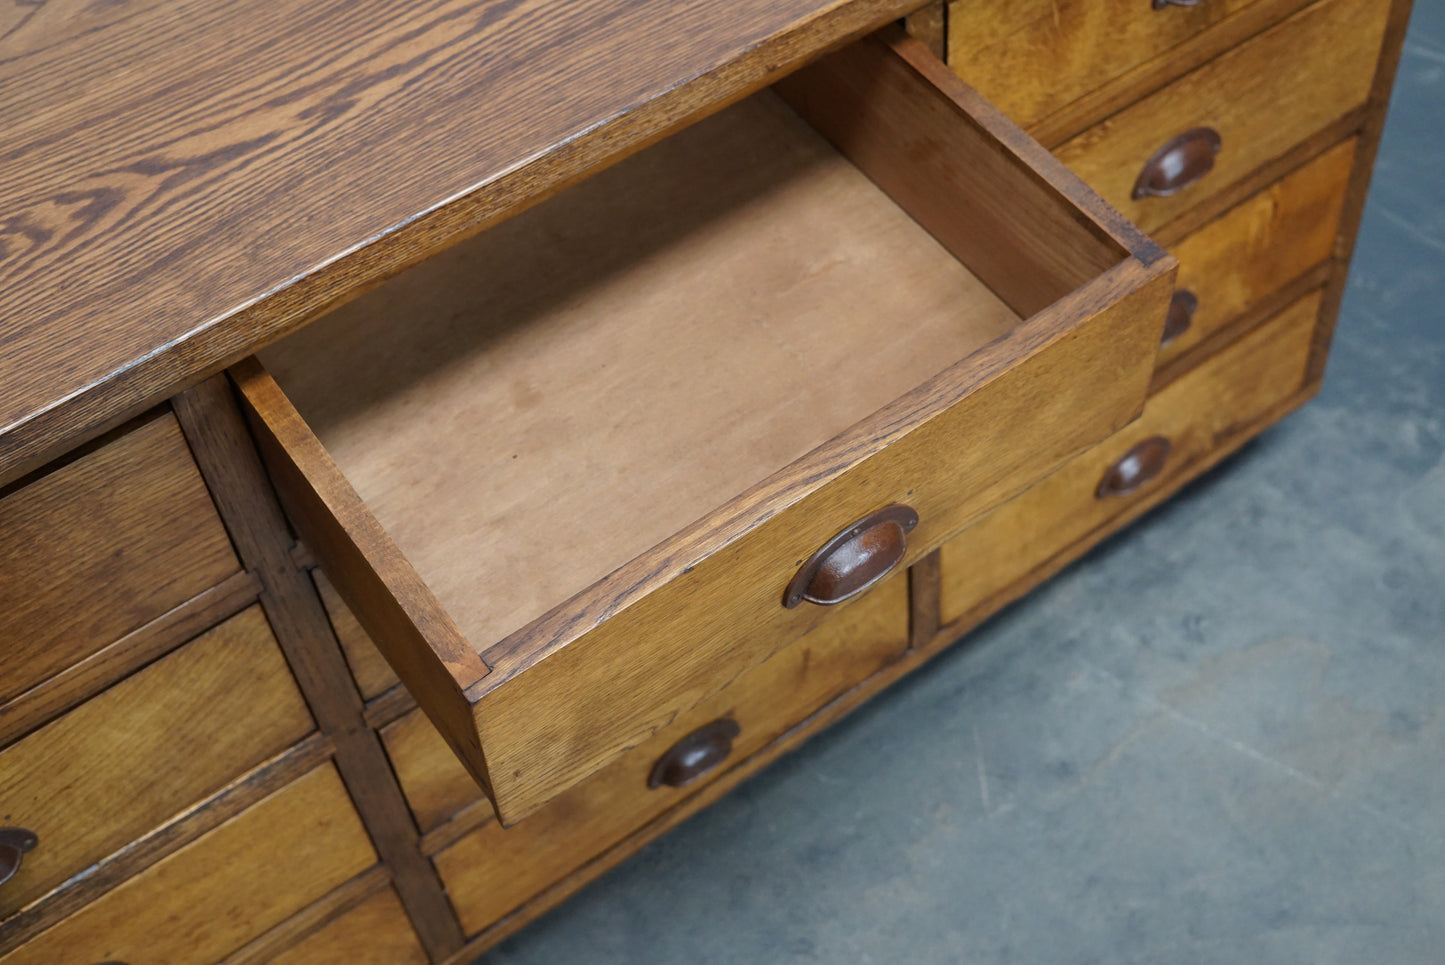 Dutch Oak Apothecary Cabinet or Bank of Drawers, Mid-20th Century